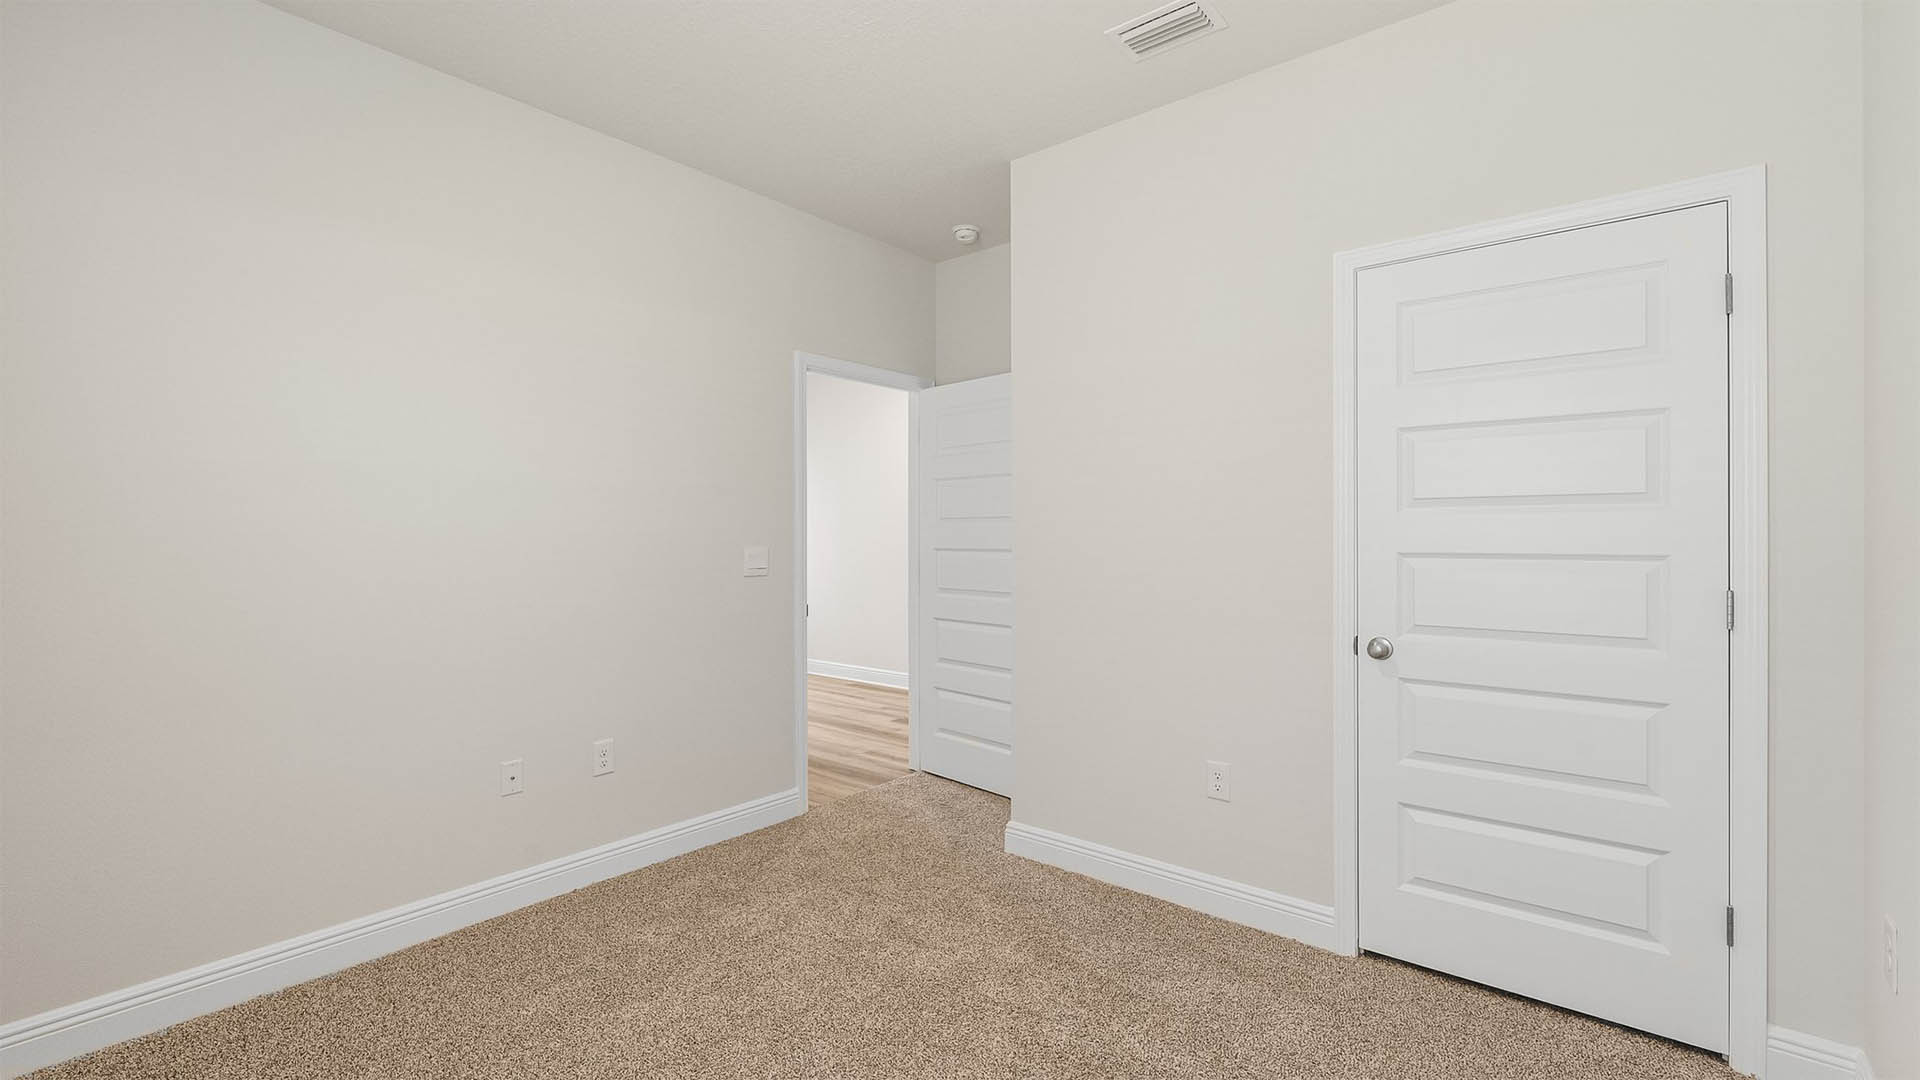 Bedroom with carpet floors and closet.